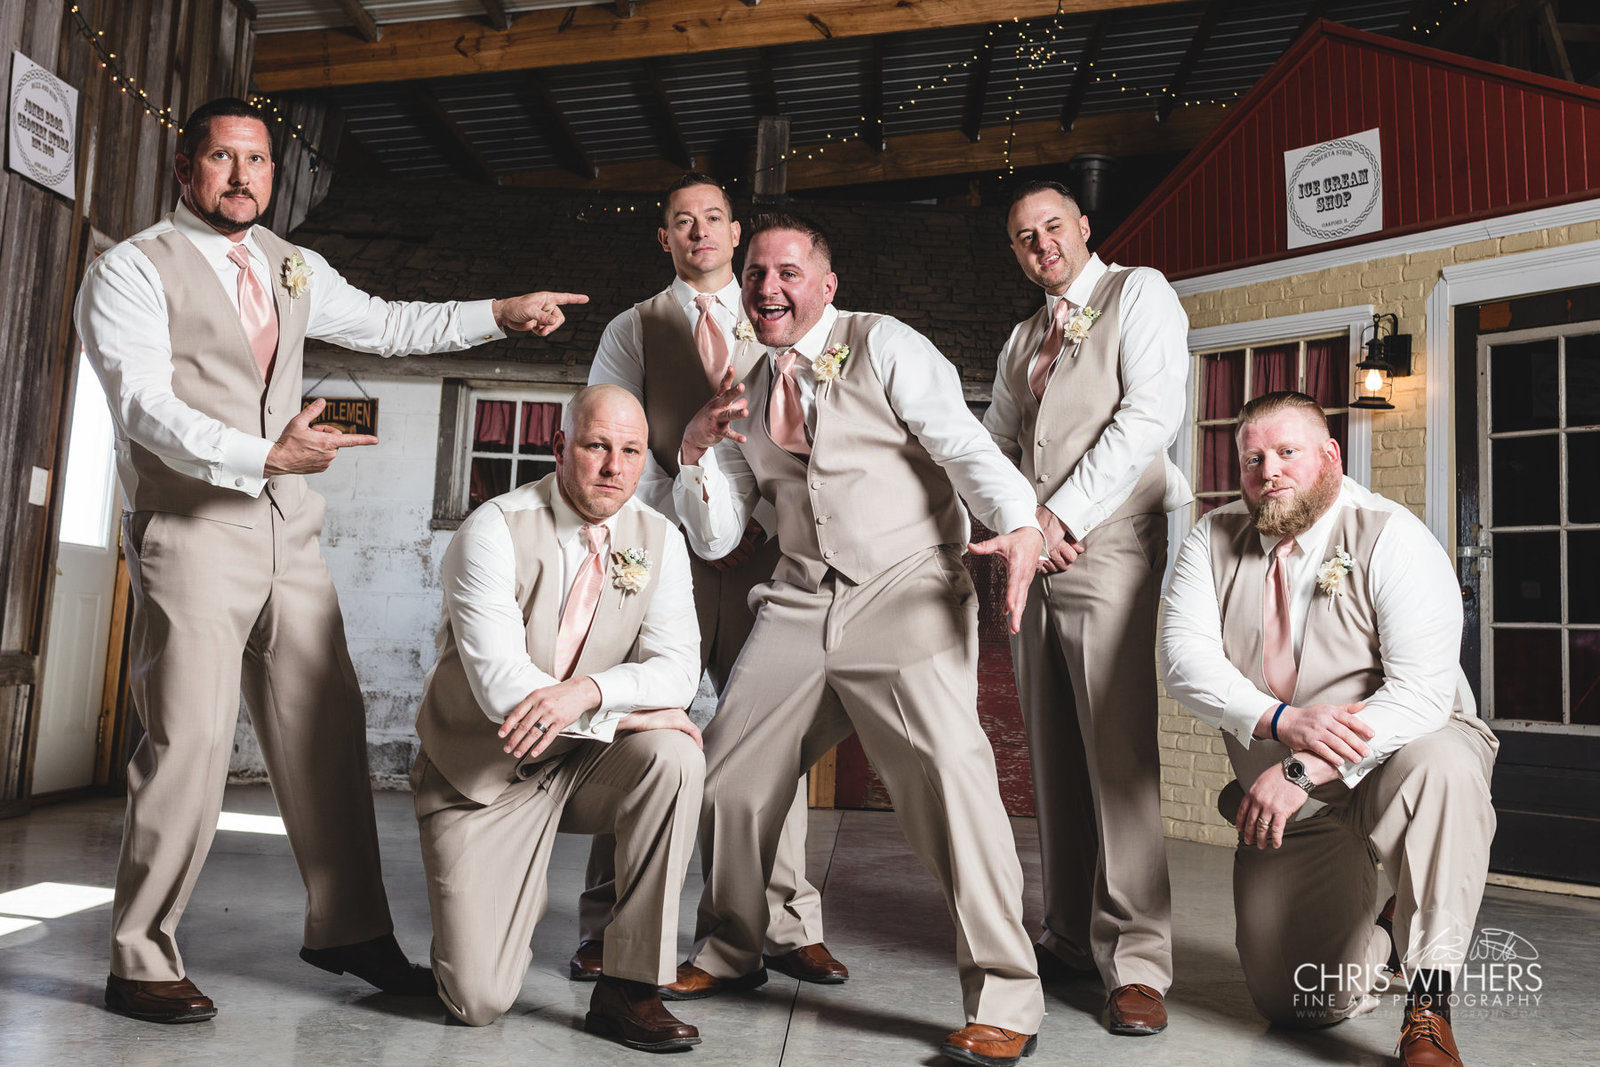 Springfield Illinois Wedding Photographer - Chris Withers Photography (154 of 159)